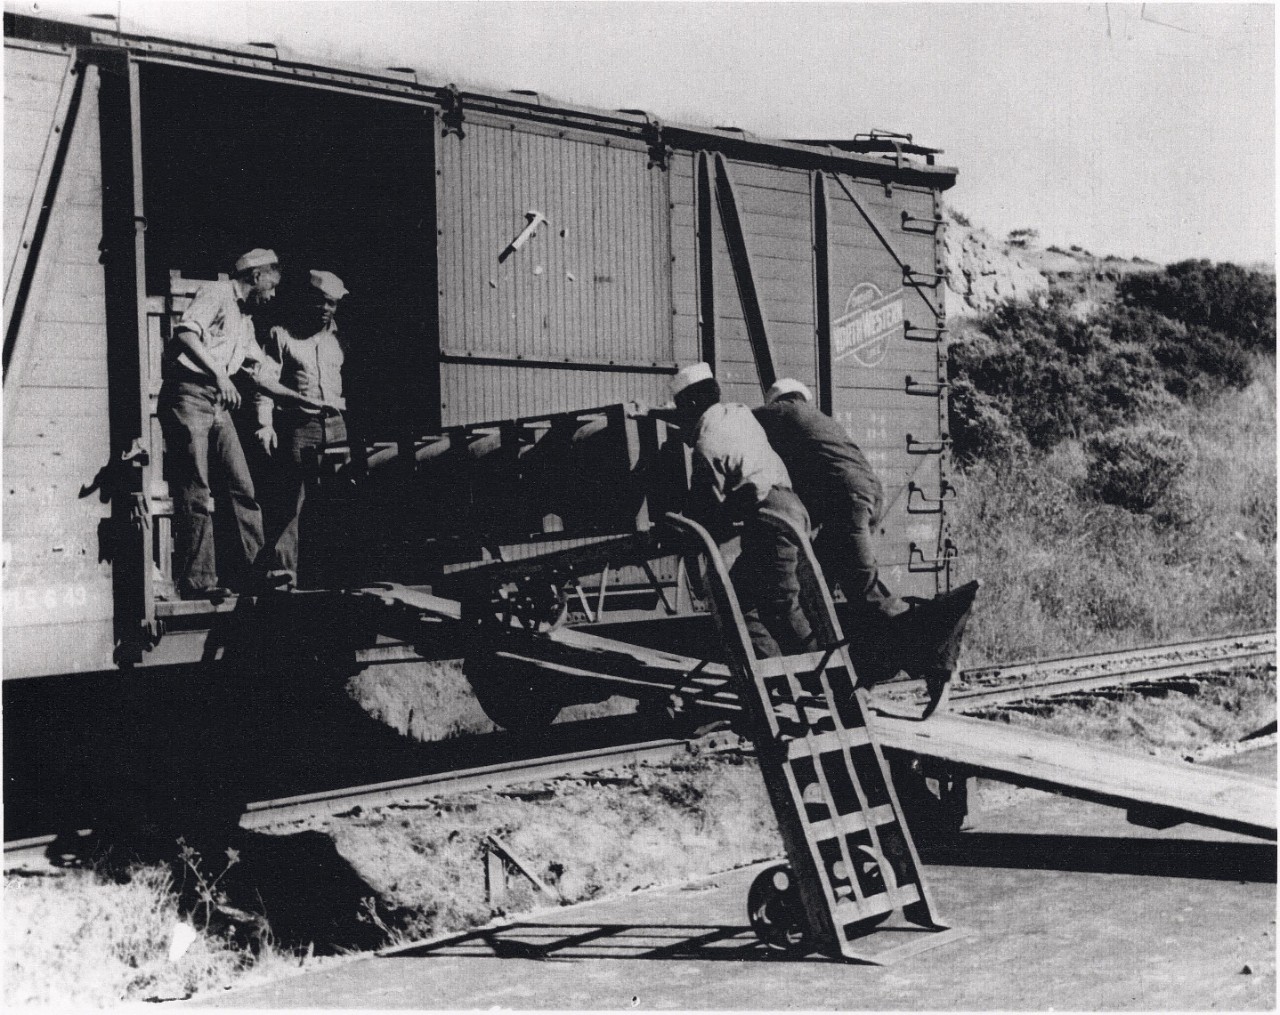 <p>African American sailors of an ordnance battalion unload aerial bombs from a railcar, Port Chicago Naval Magazine, circa 1943/44.</p>
